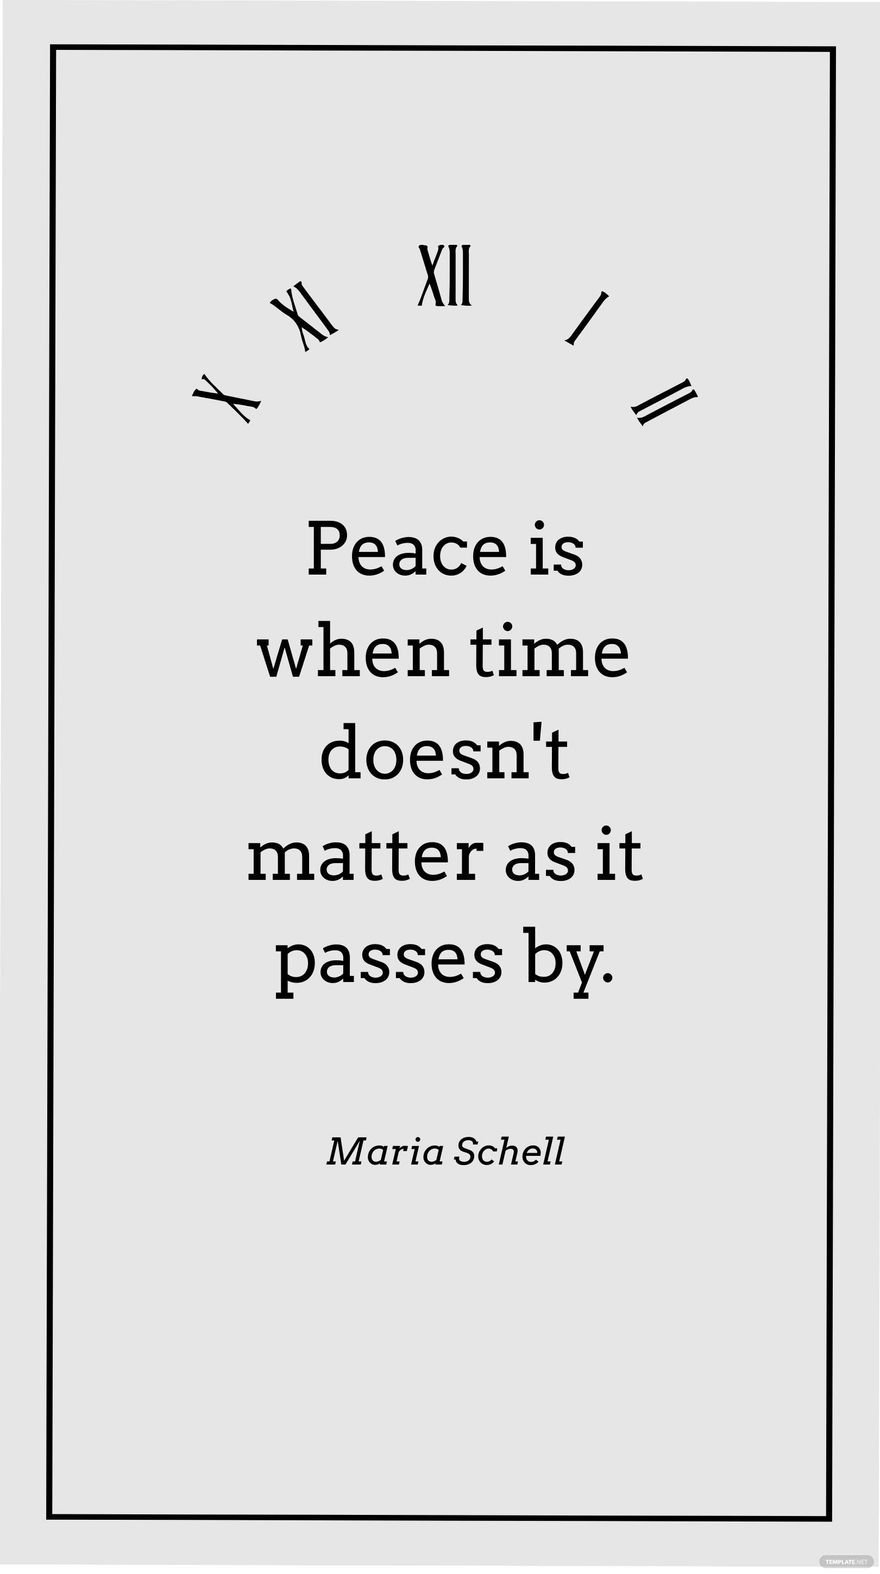 Free Maria Schell - Peace is when time doesn't matter as it passes by. in JPG